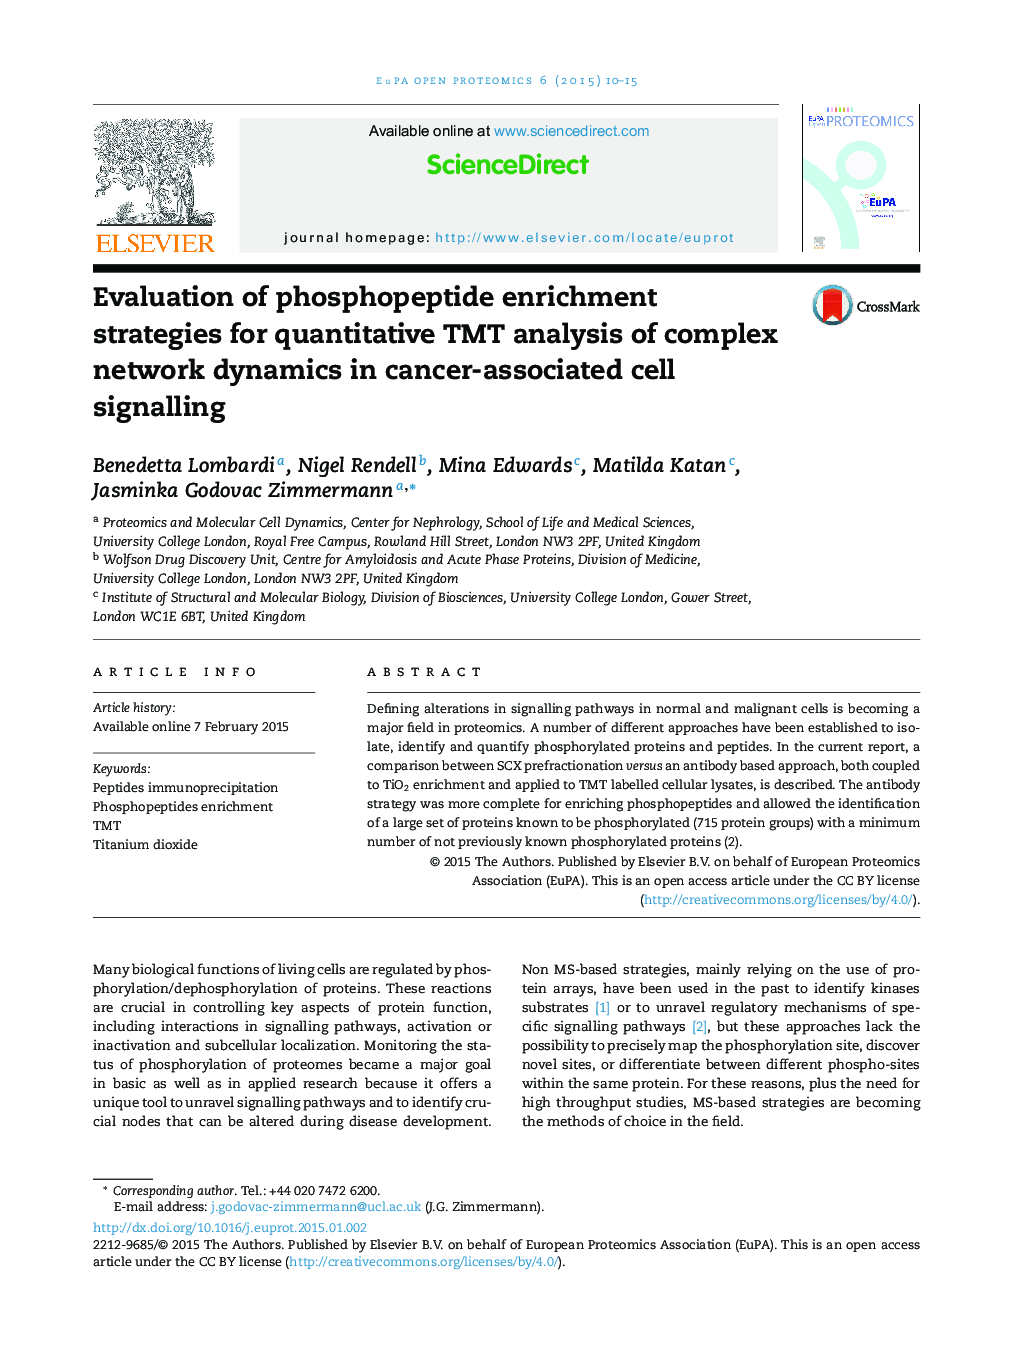 Evaluation of phosphopeptide enrichment strategies for quantitative TMT analysis of complex network dynamics in cancer-associated cell signalling 